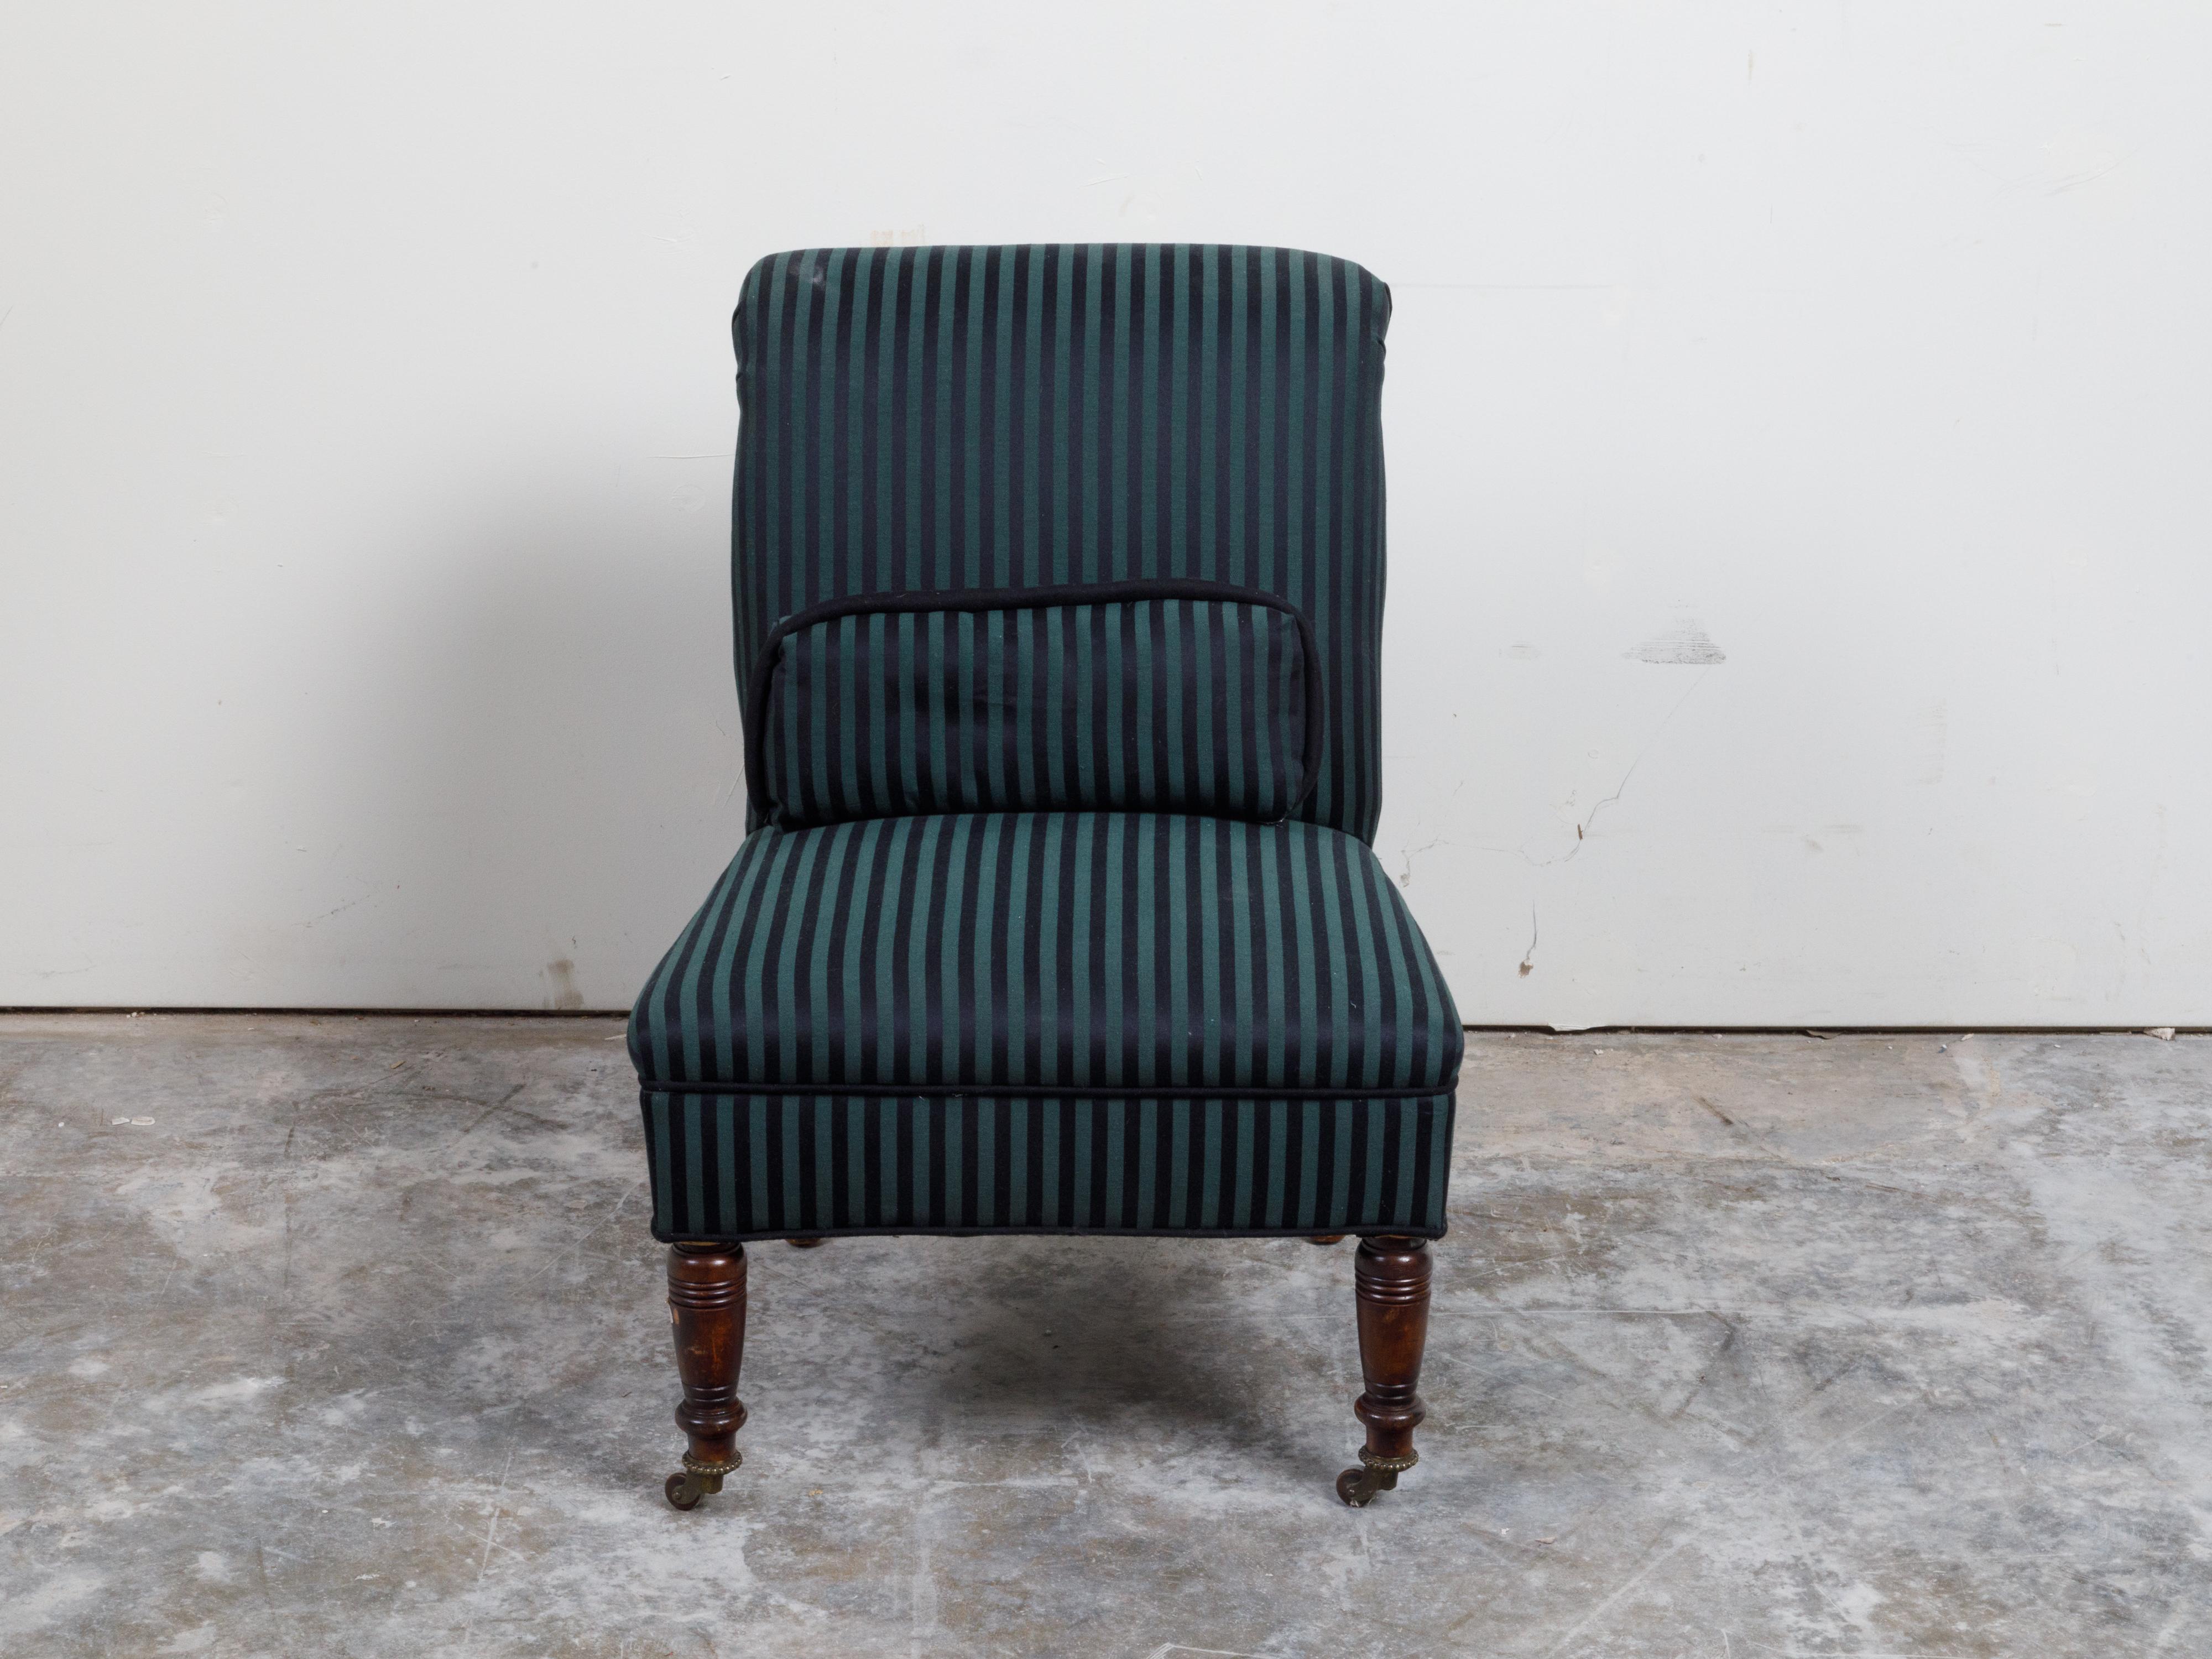 A French Directoire inspired wooden slipper chair from the 19th century, with striped upholstery and casters. Created in France during the 19th century, this slipper chair, made to be used in a bedroom to help a lady get dressed, is upholstered with